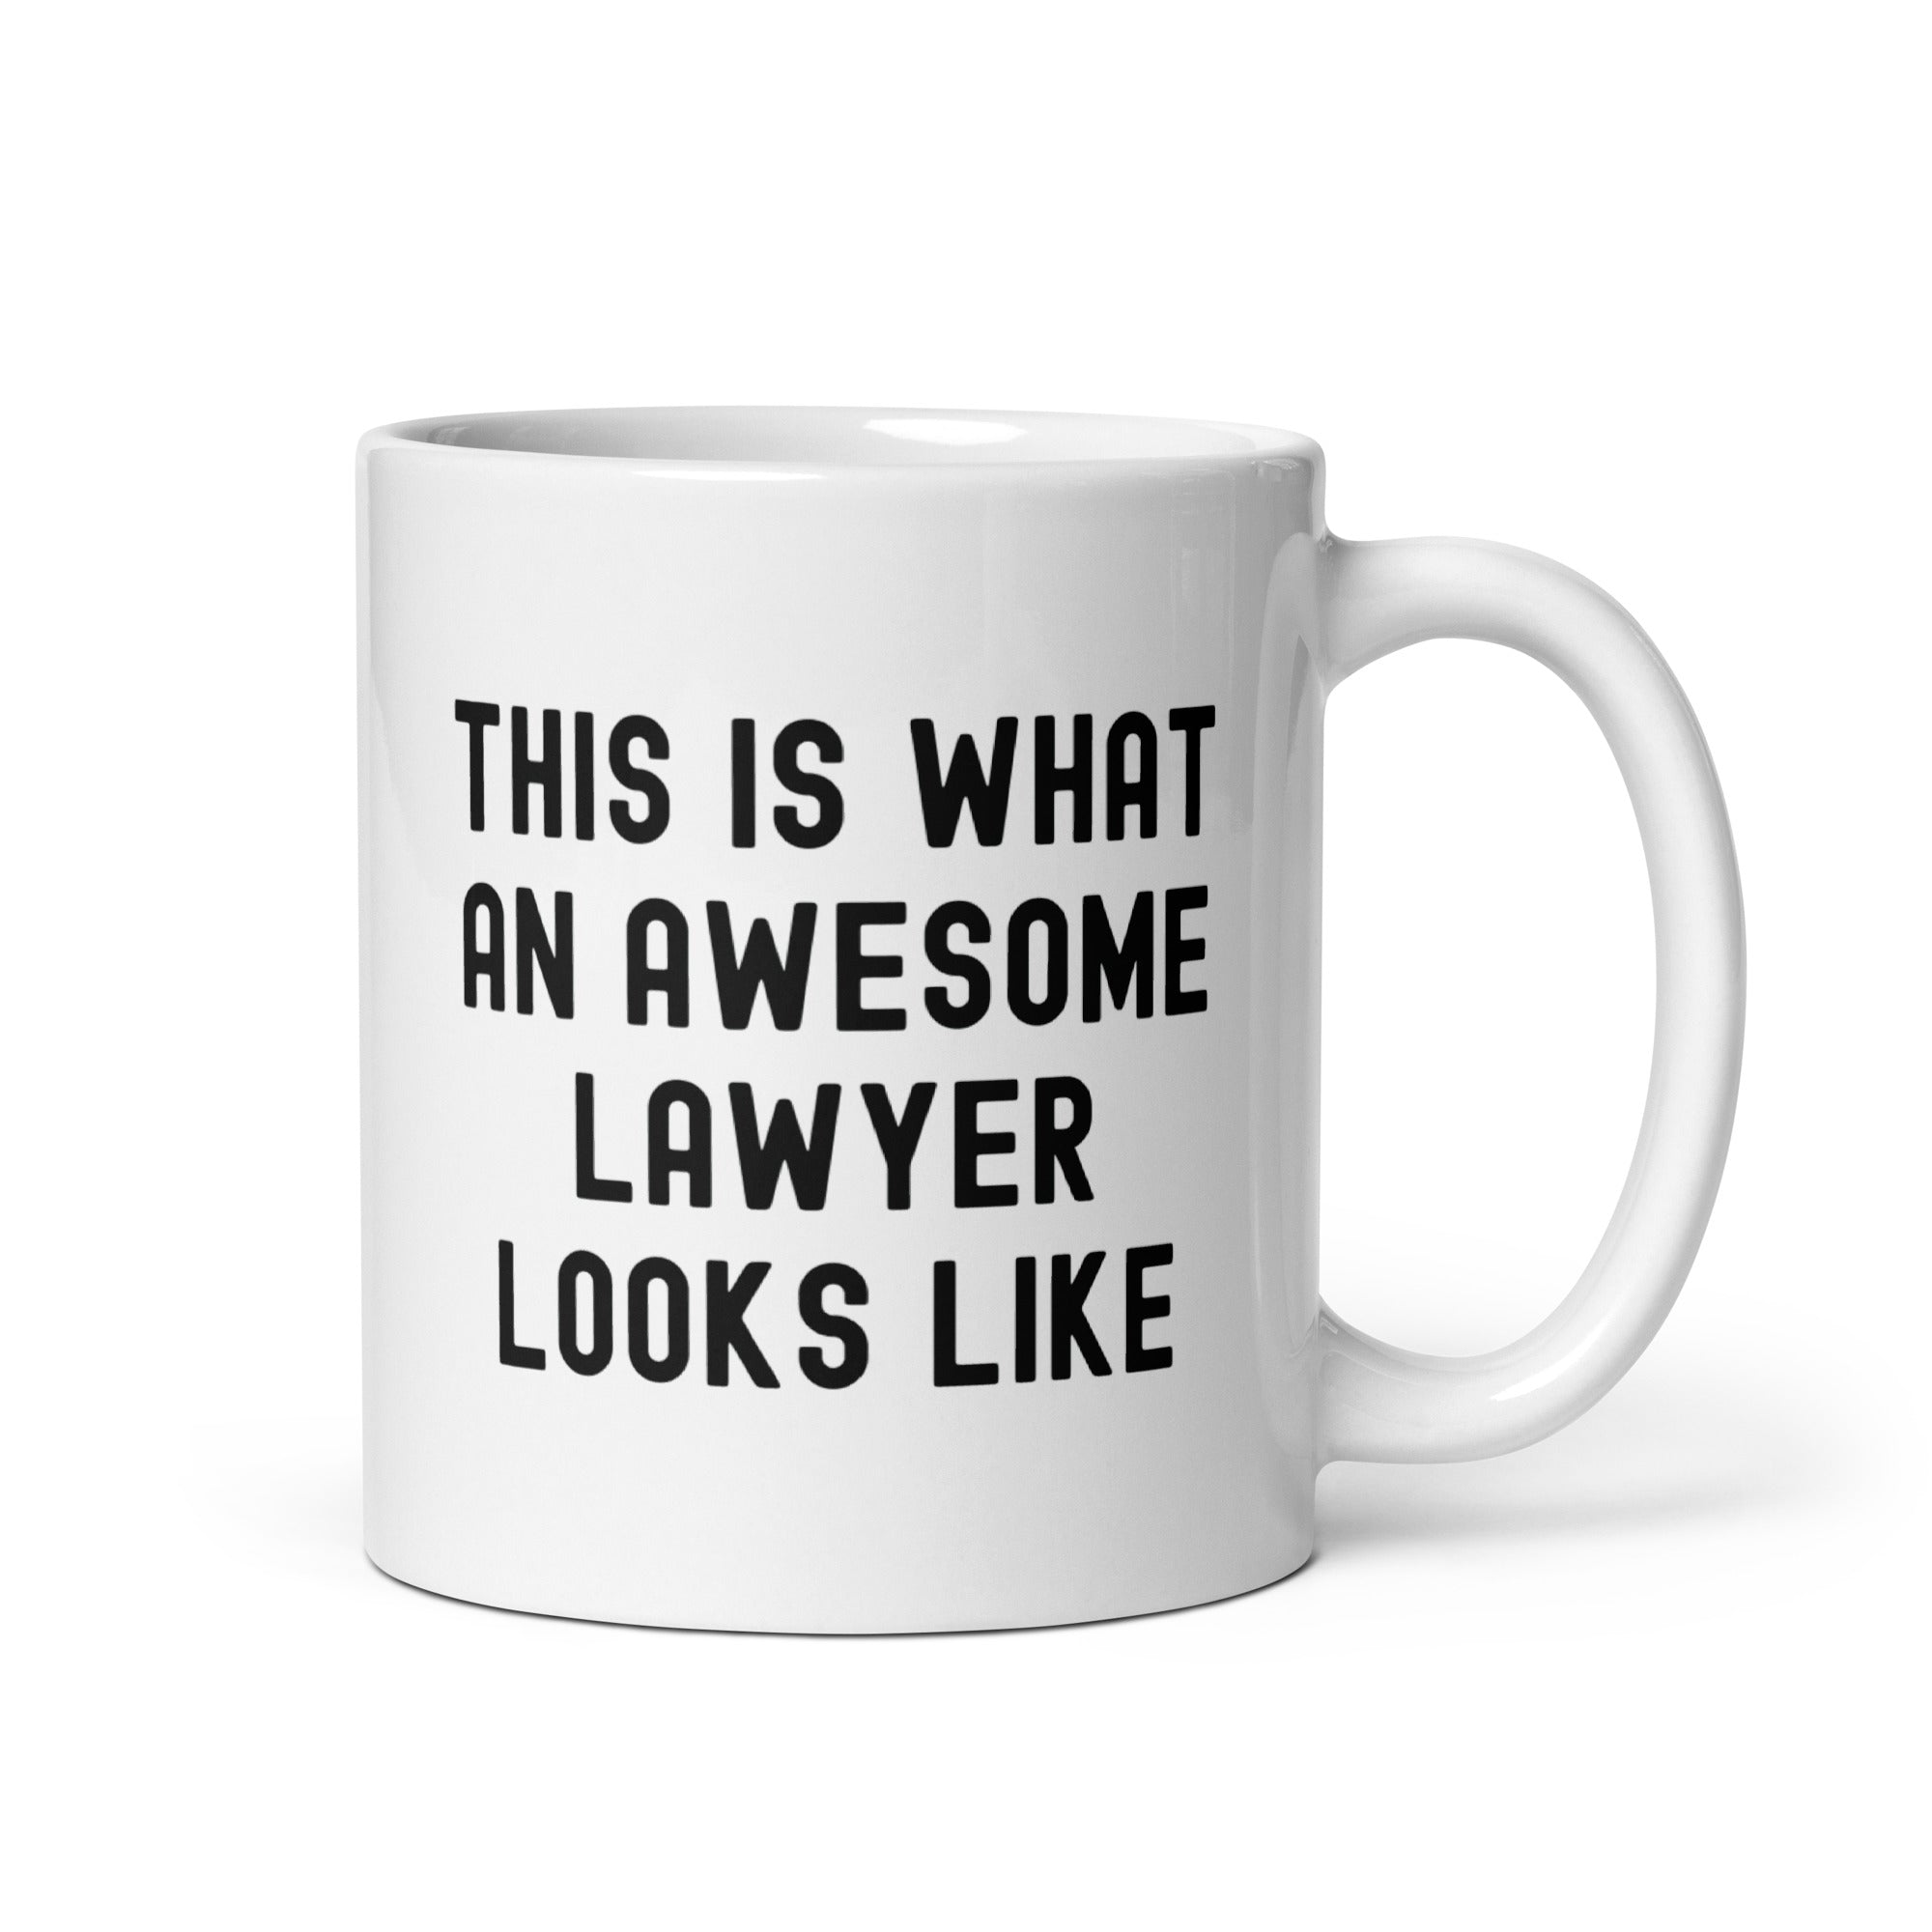 White glossy mug | This is what an awesome lawyer looks like